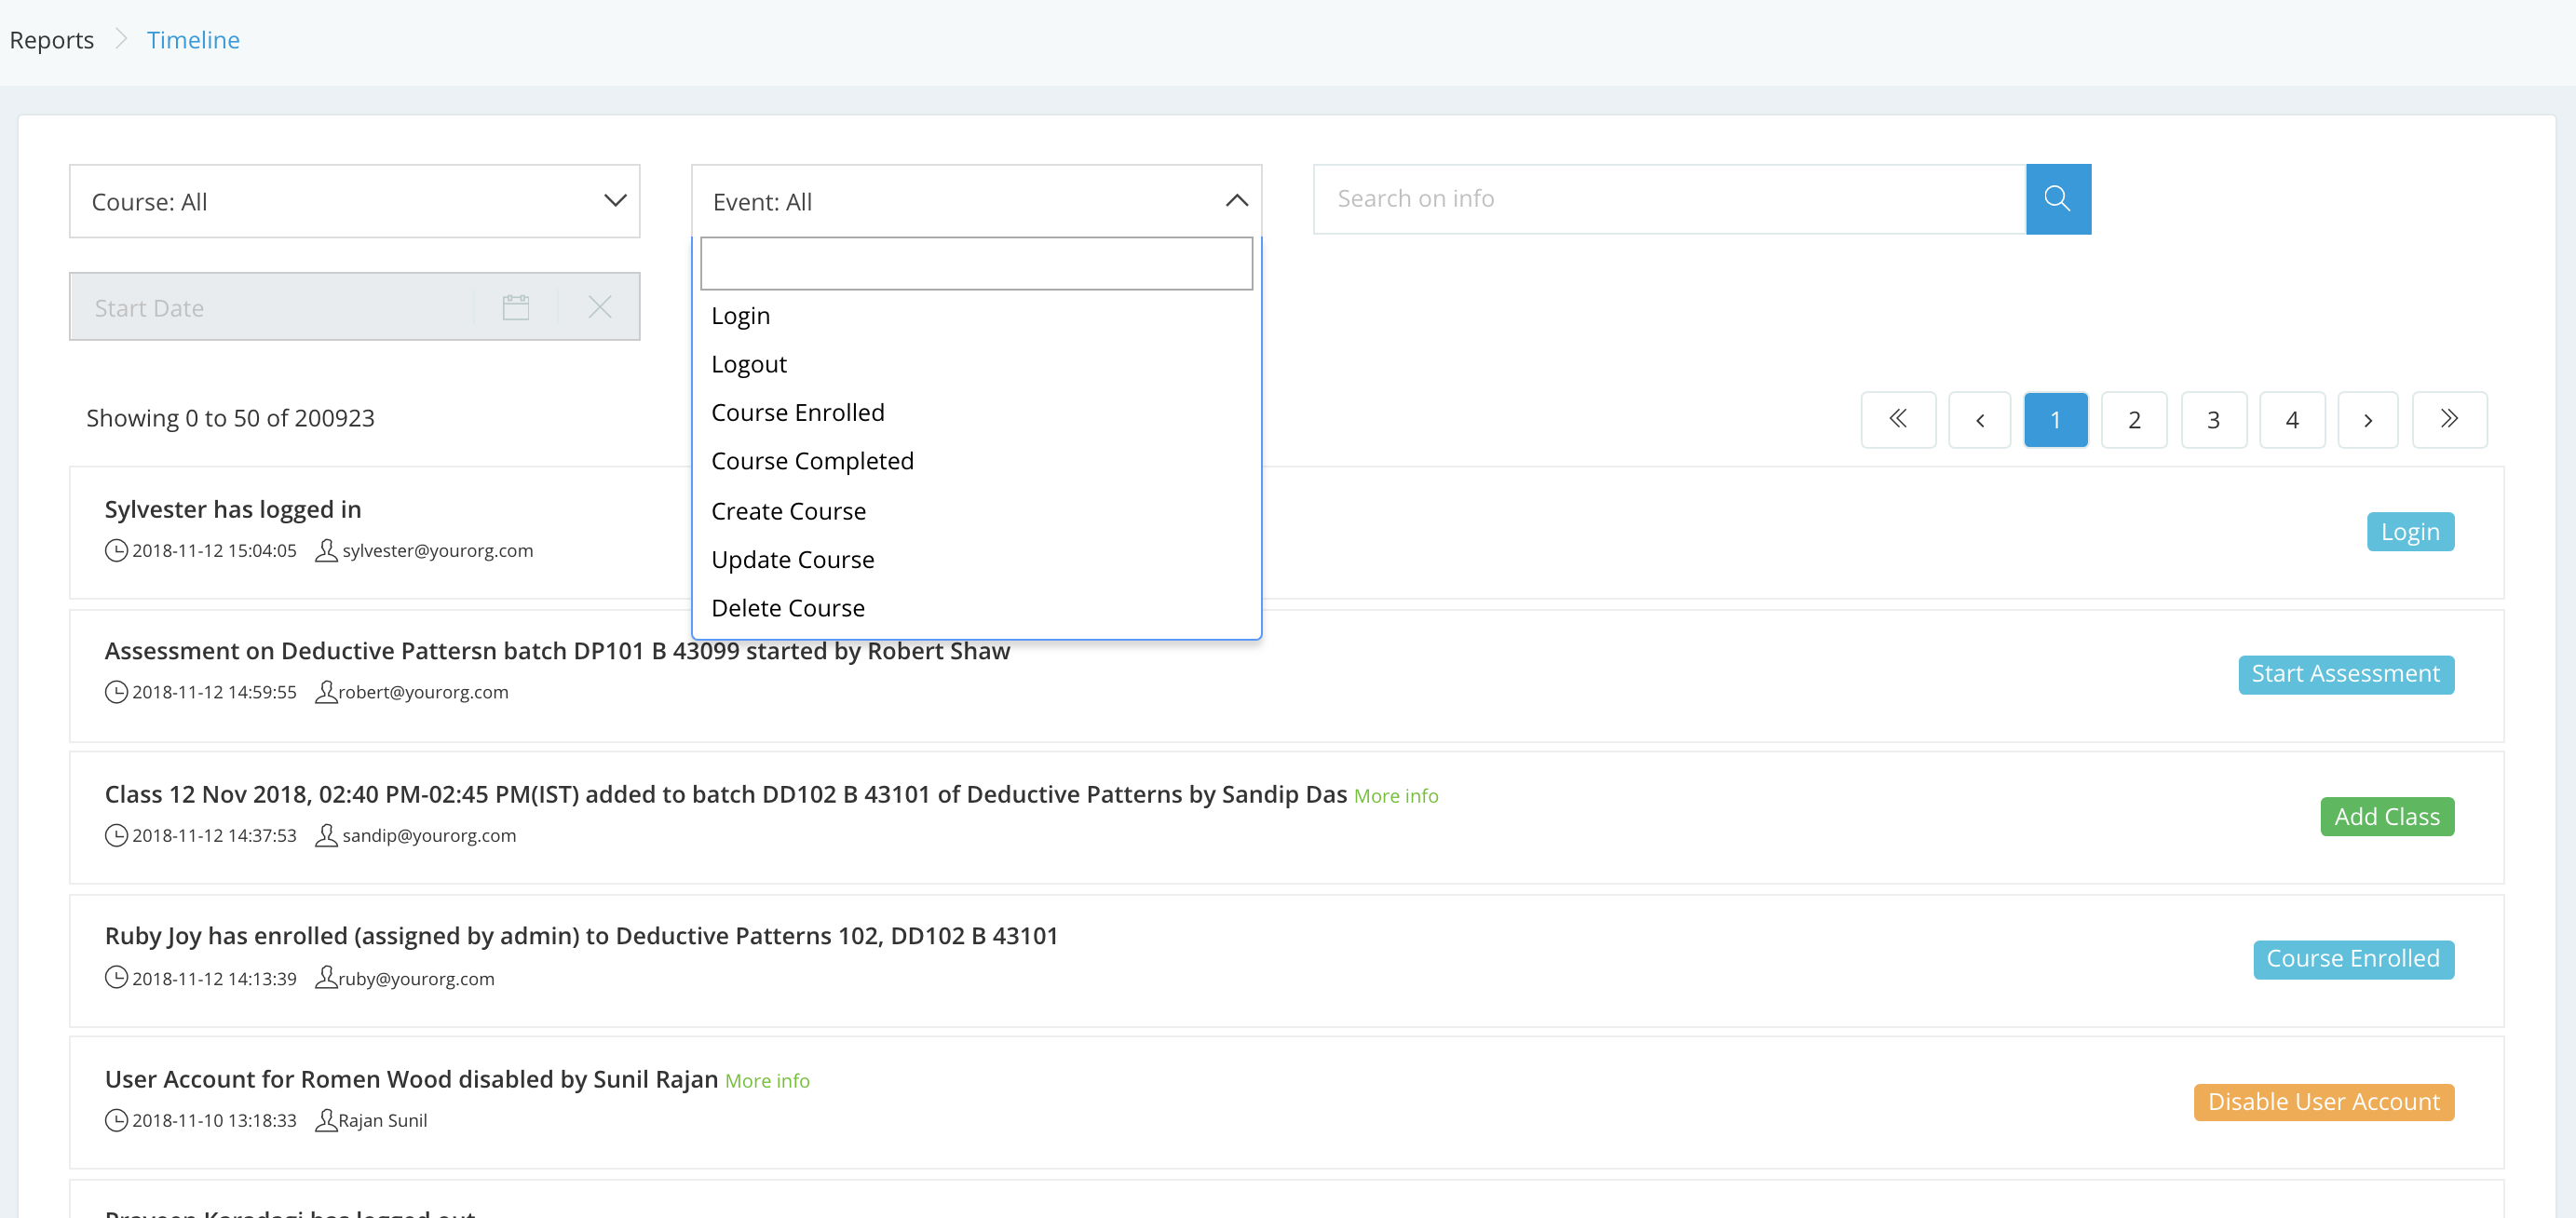 SeekLMS logs all LMS events for audit